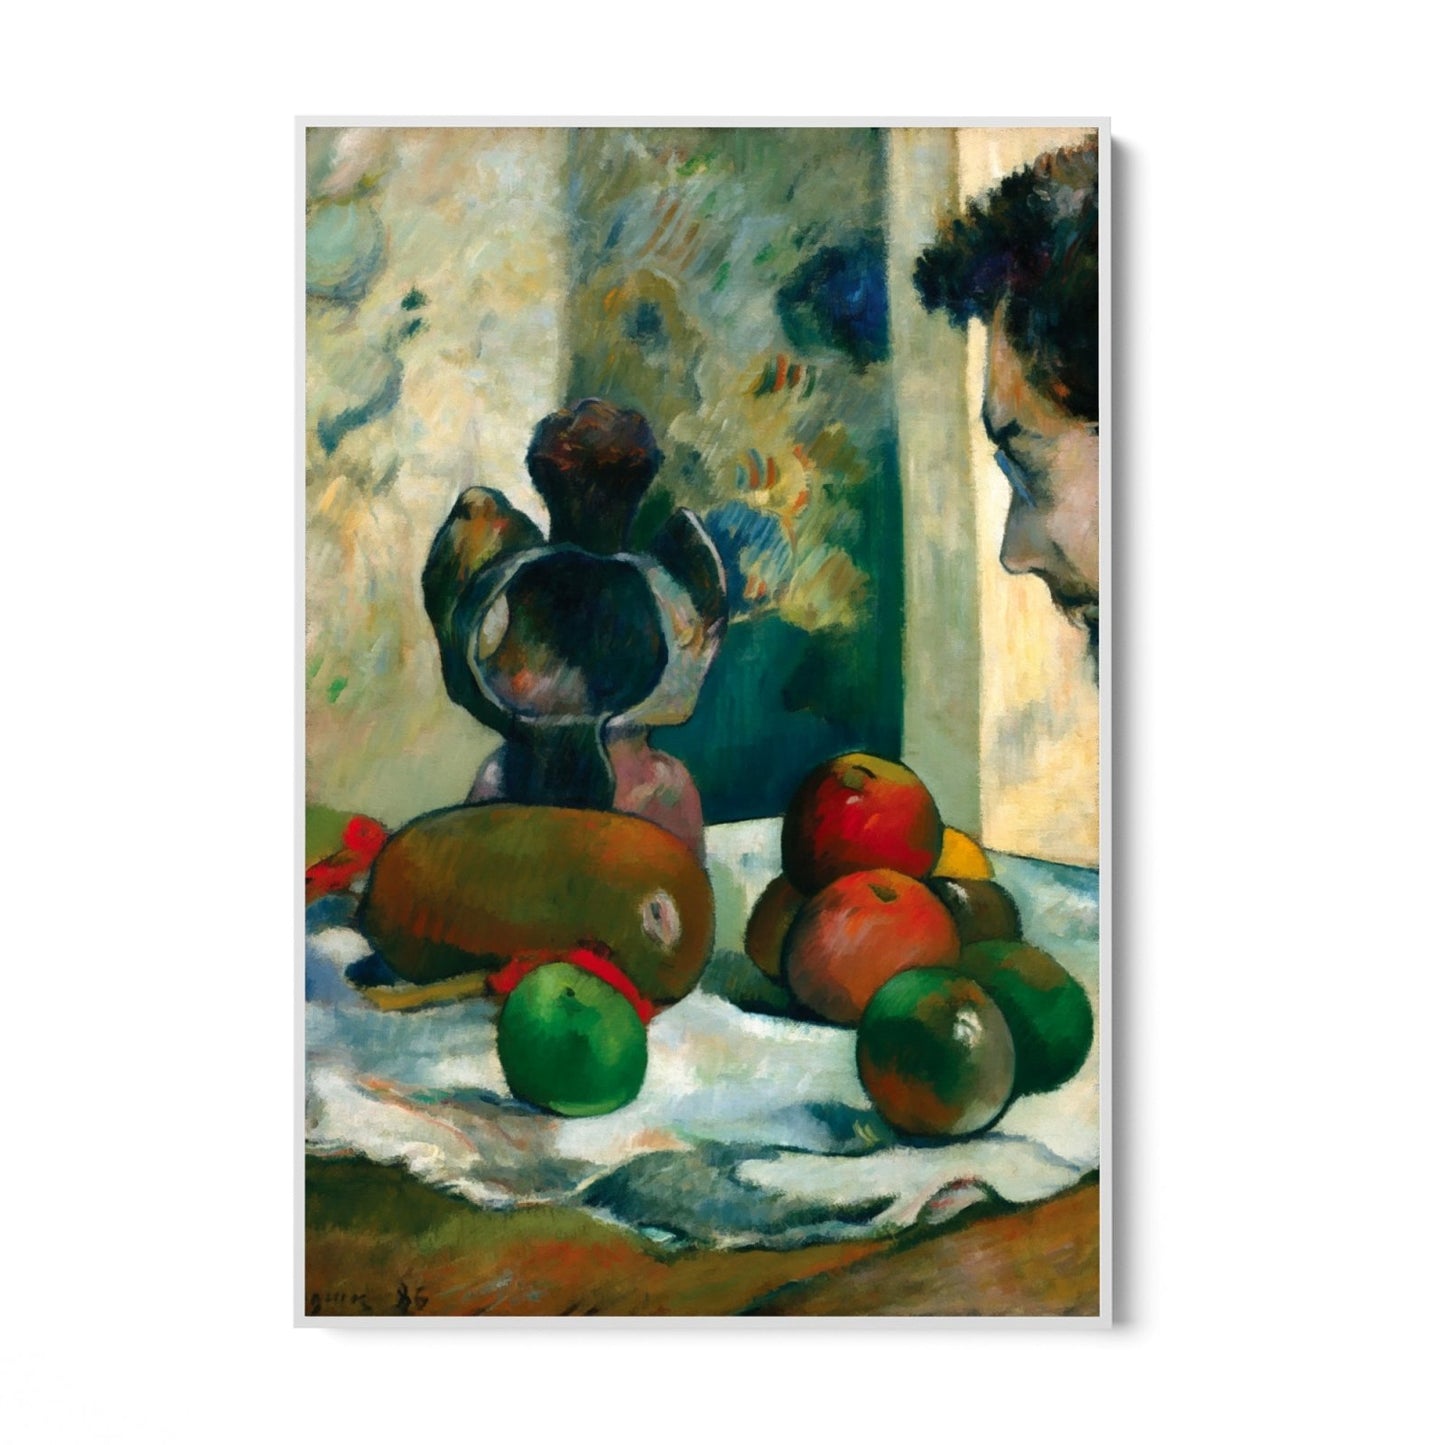 Still life with profile of Laval, Paul Gauguin